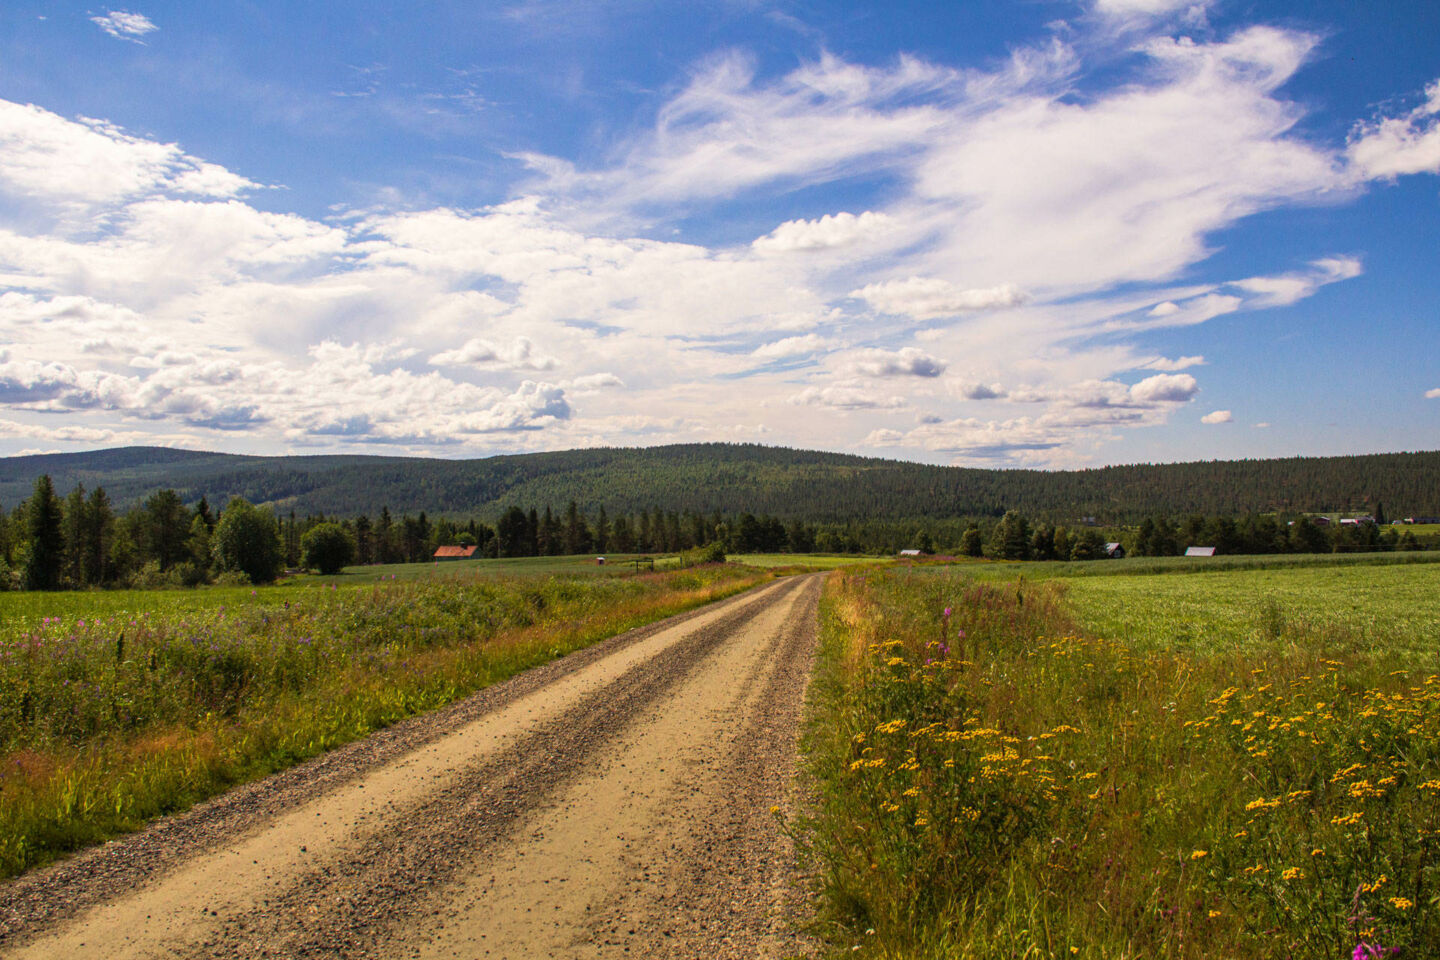 The road to Lapland ( Salla, a Finnish Lapland filming location)